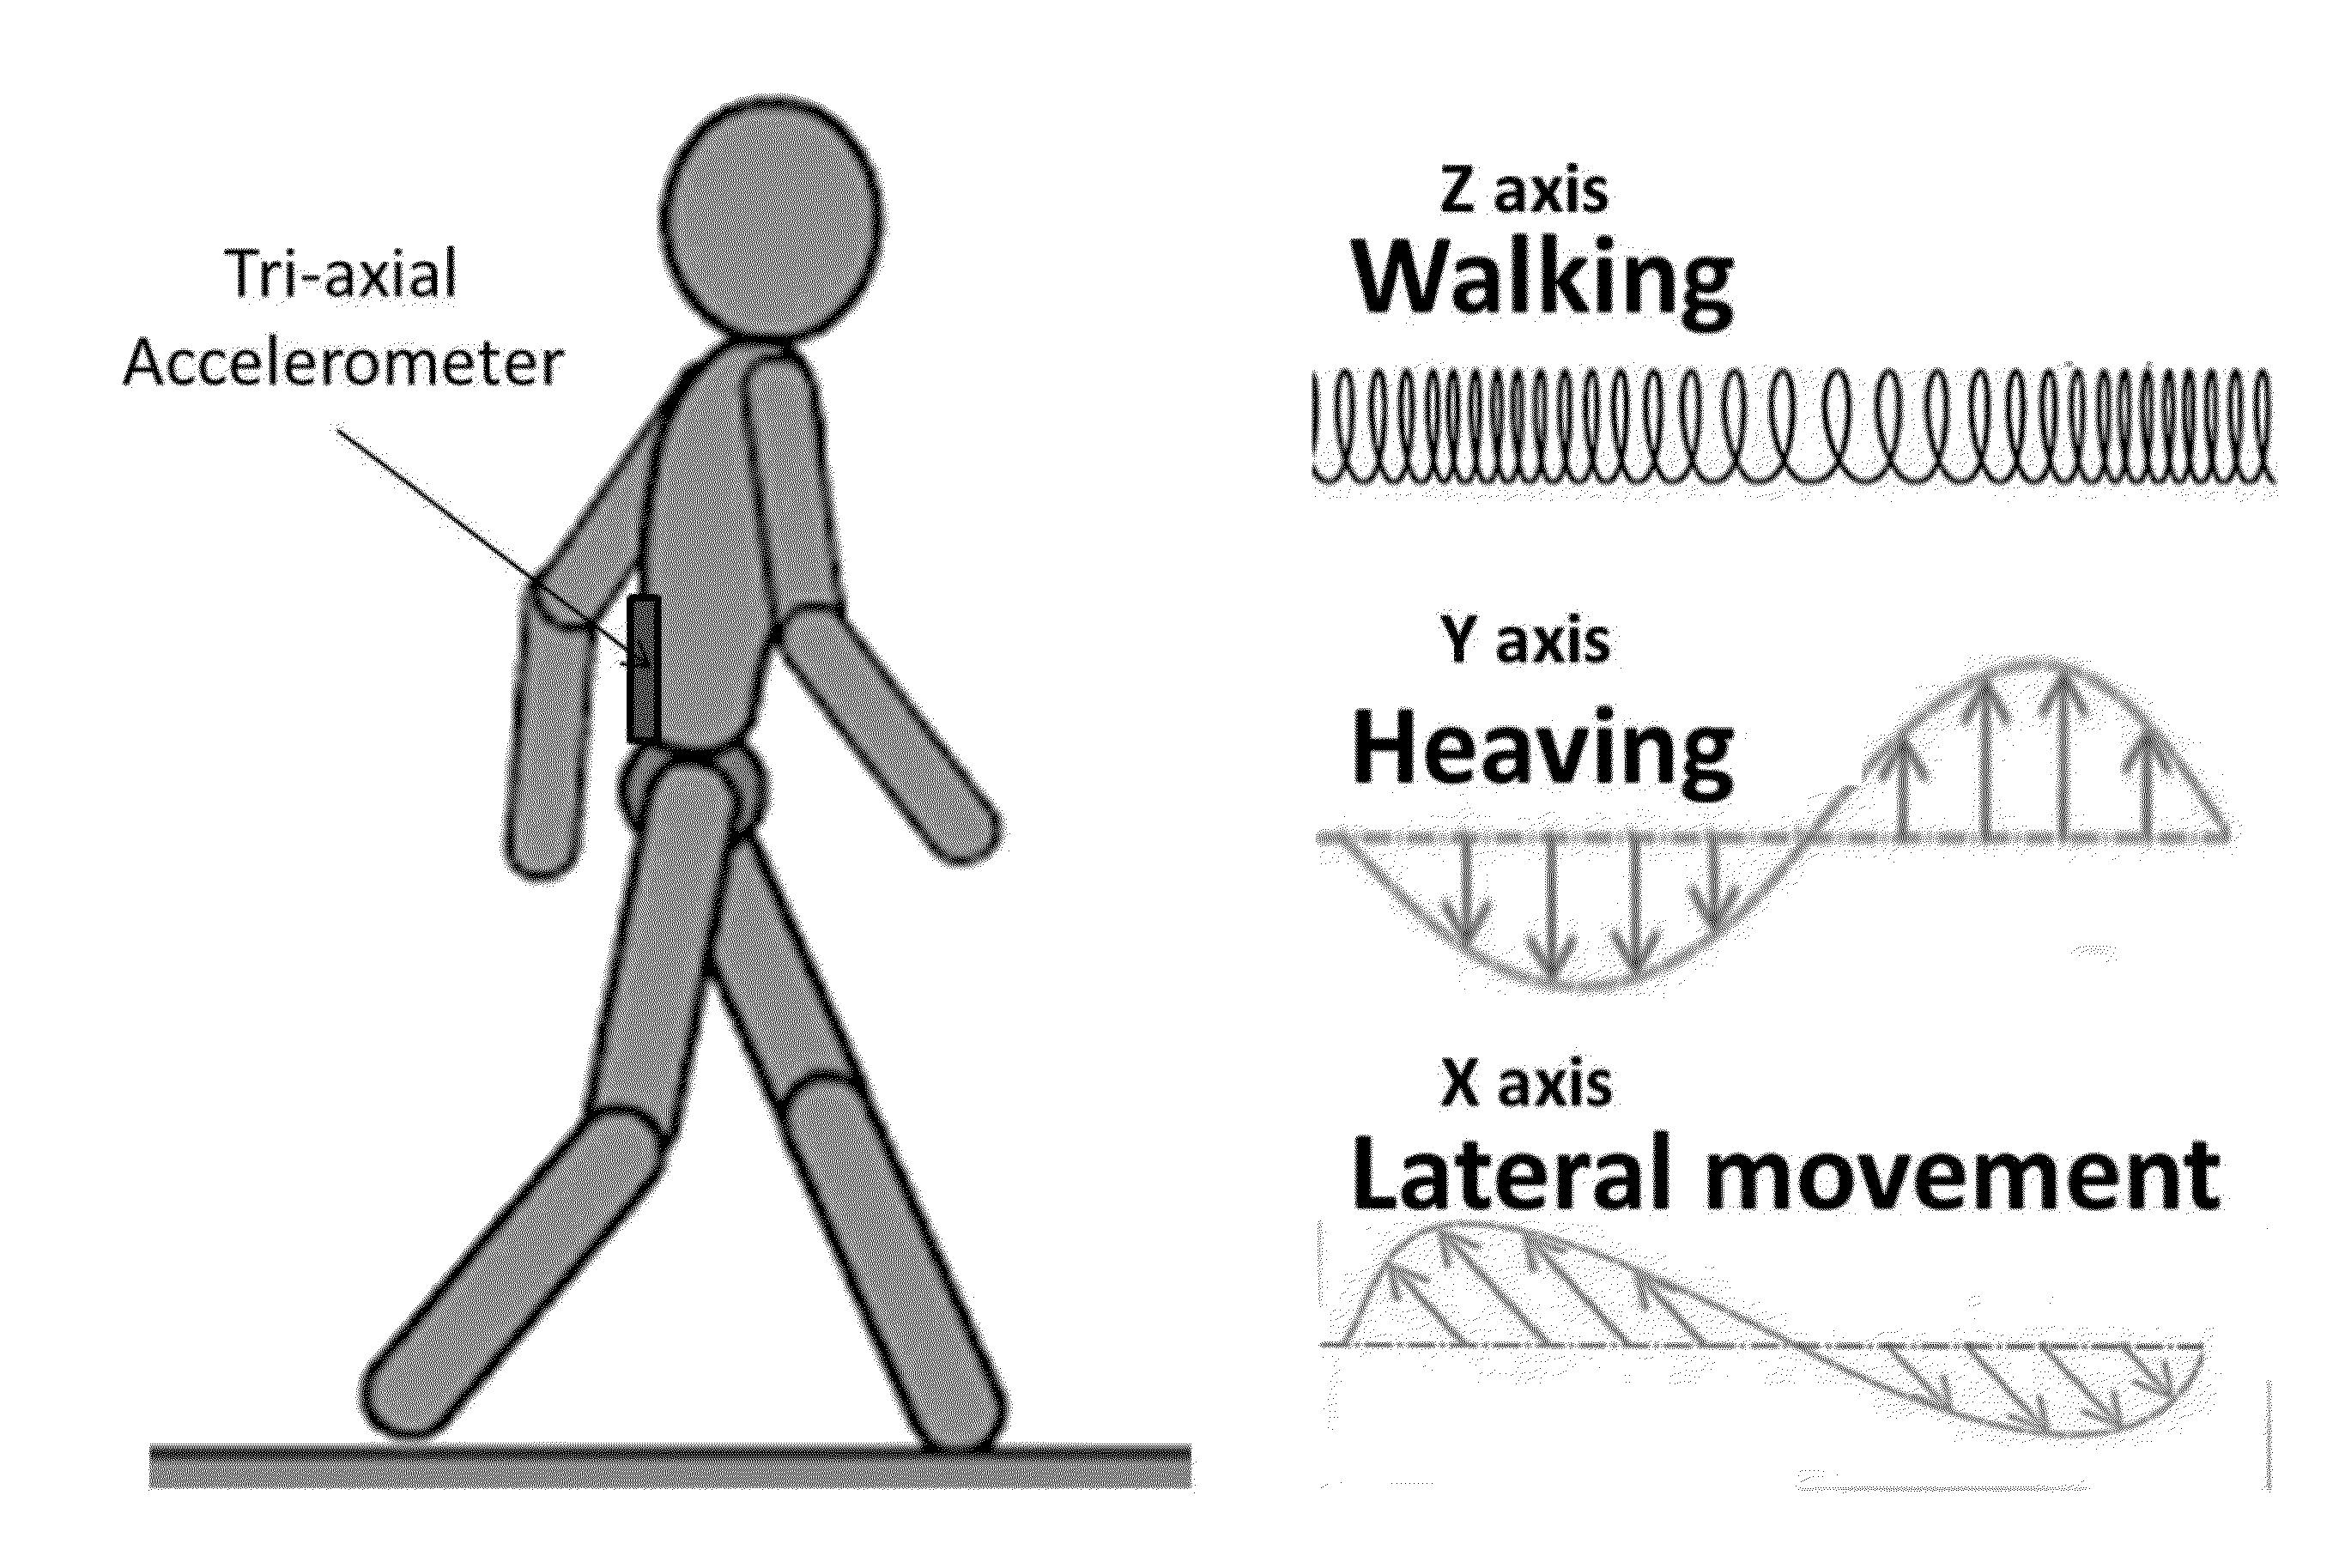 Gait measurement with 3-axes accelerometer/gyro in mobile devices